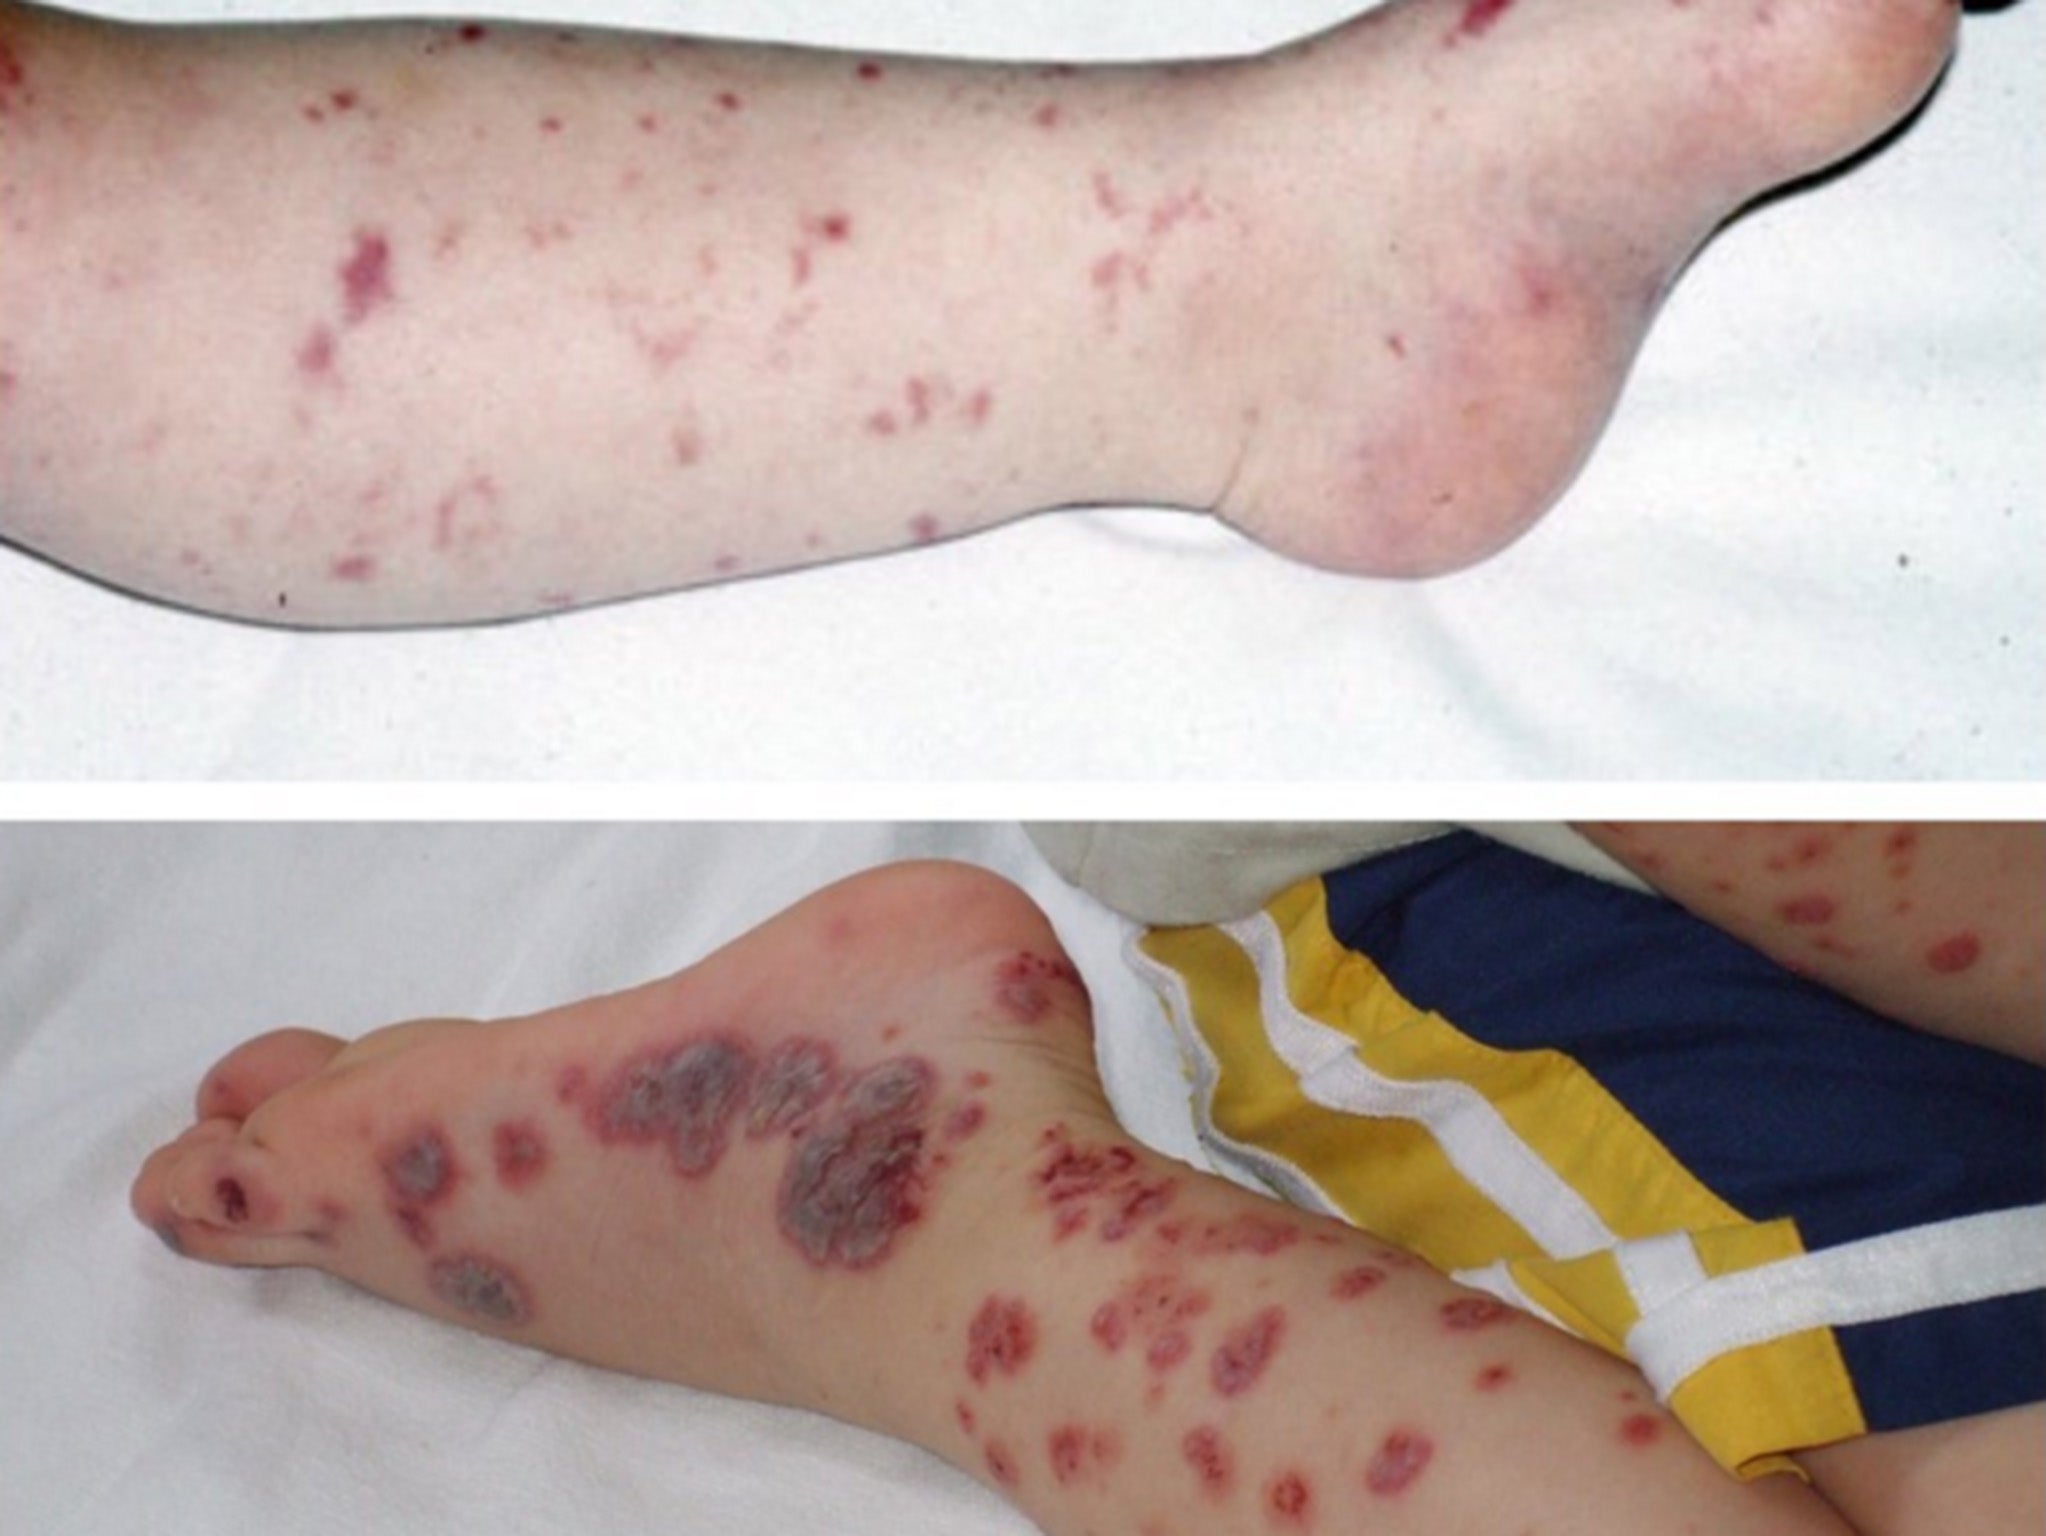 A photo shared on Twitter of different skin rashes